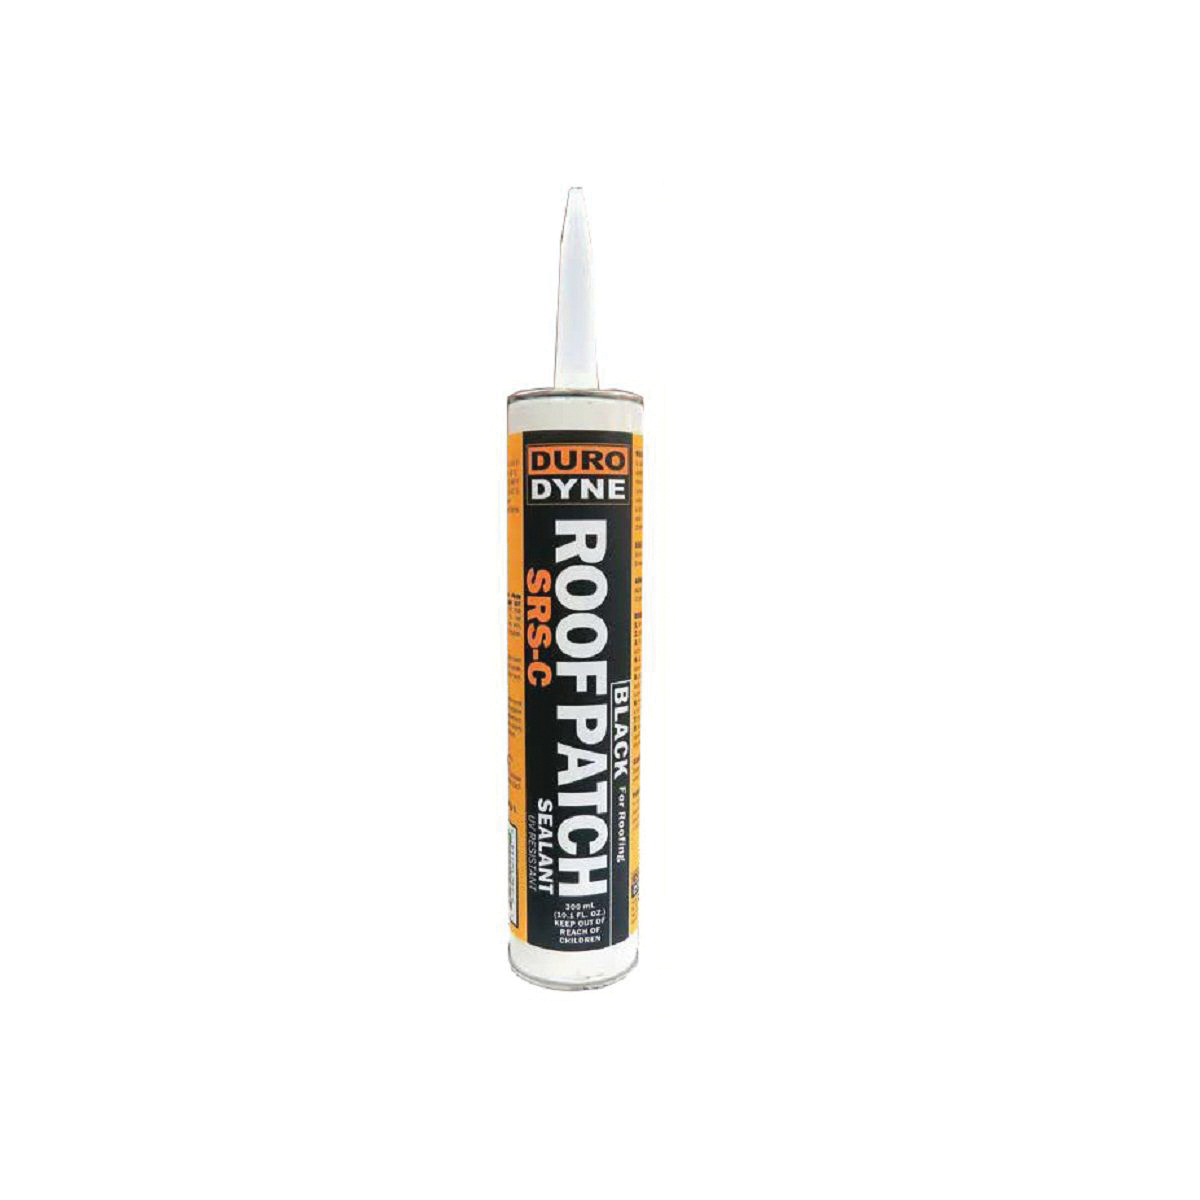 Duro Dyne® 5114 Roof Patch Sealant, Paste, Black, Solvent, 7 day Curing